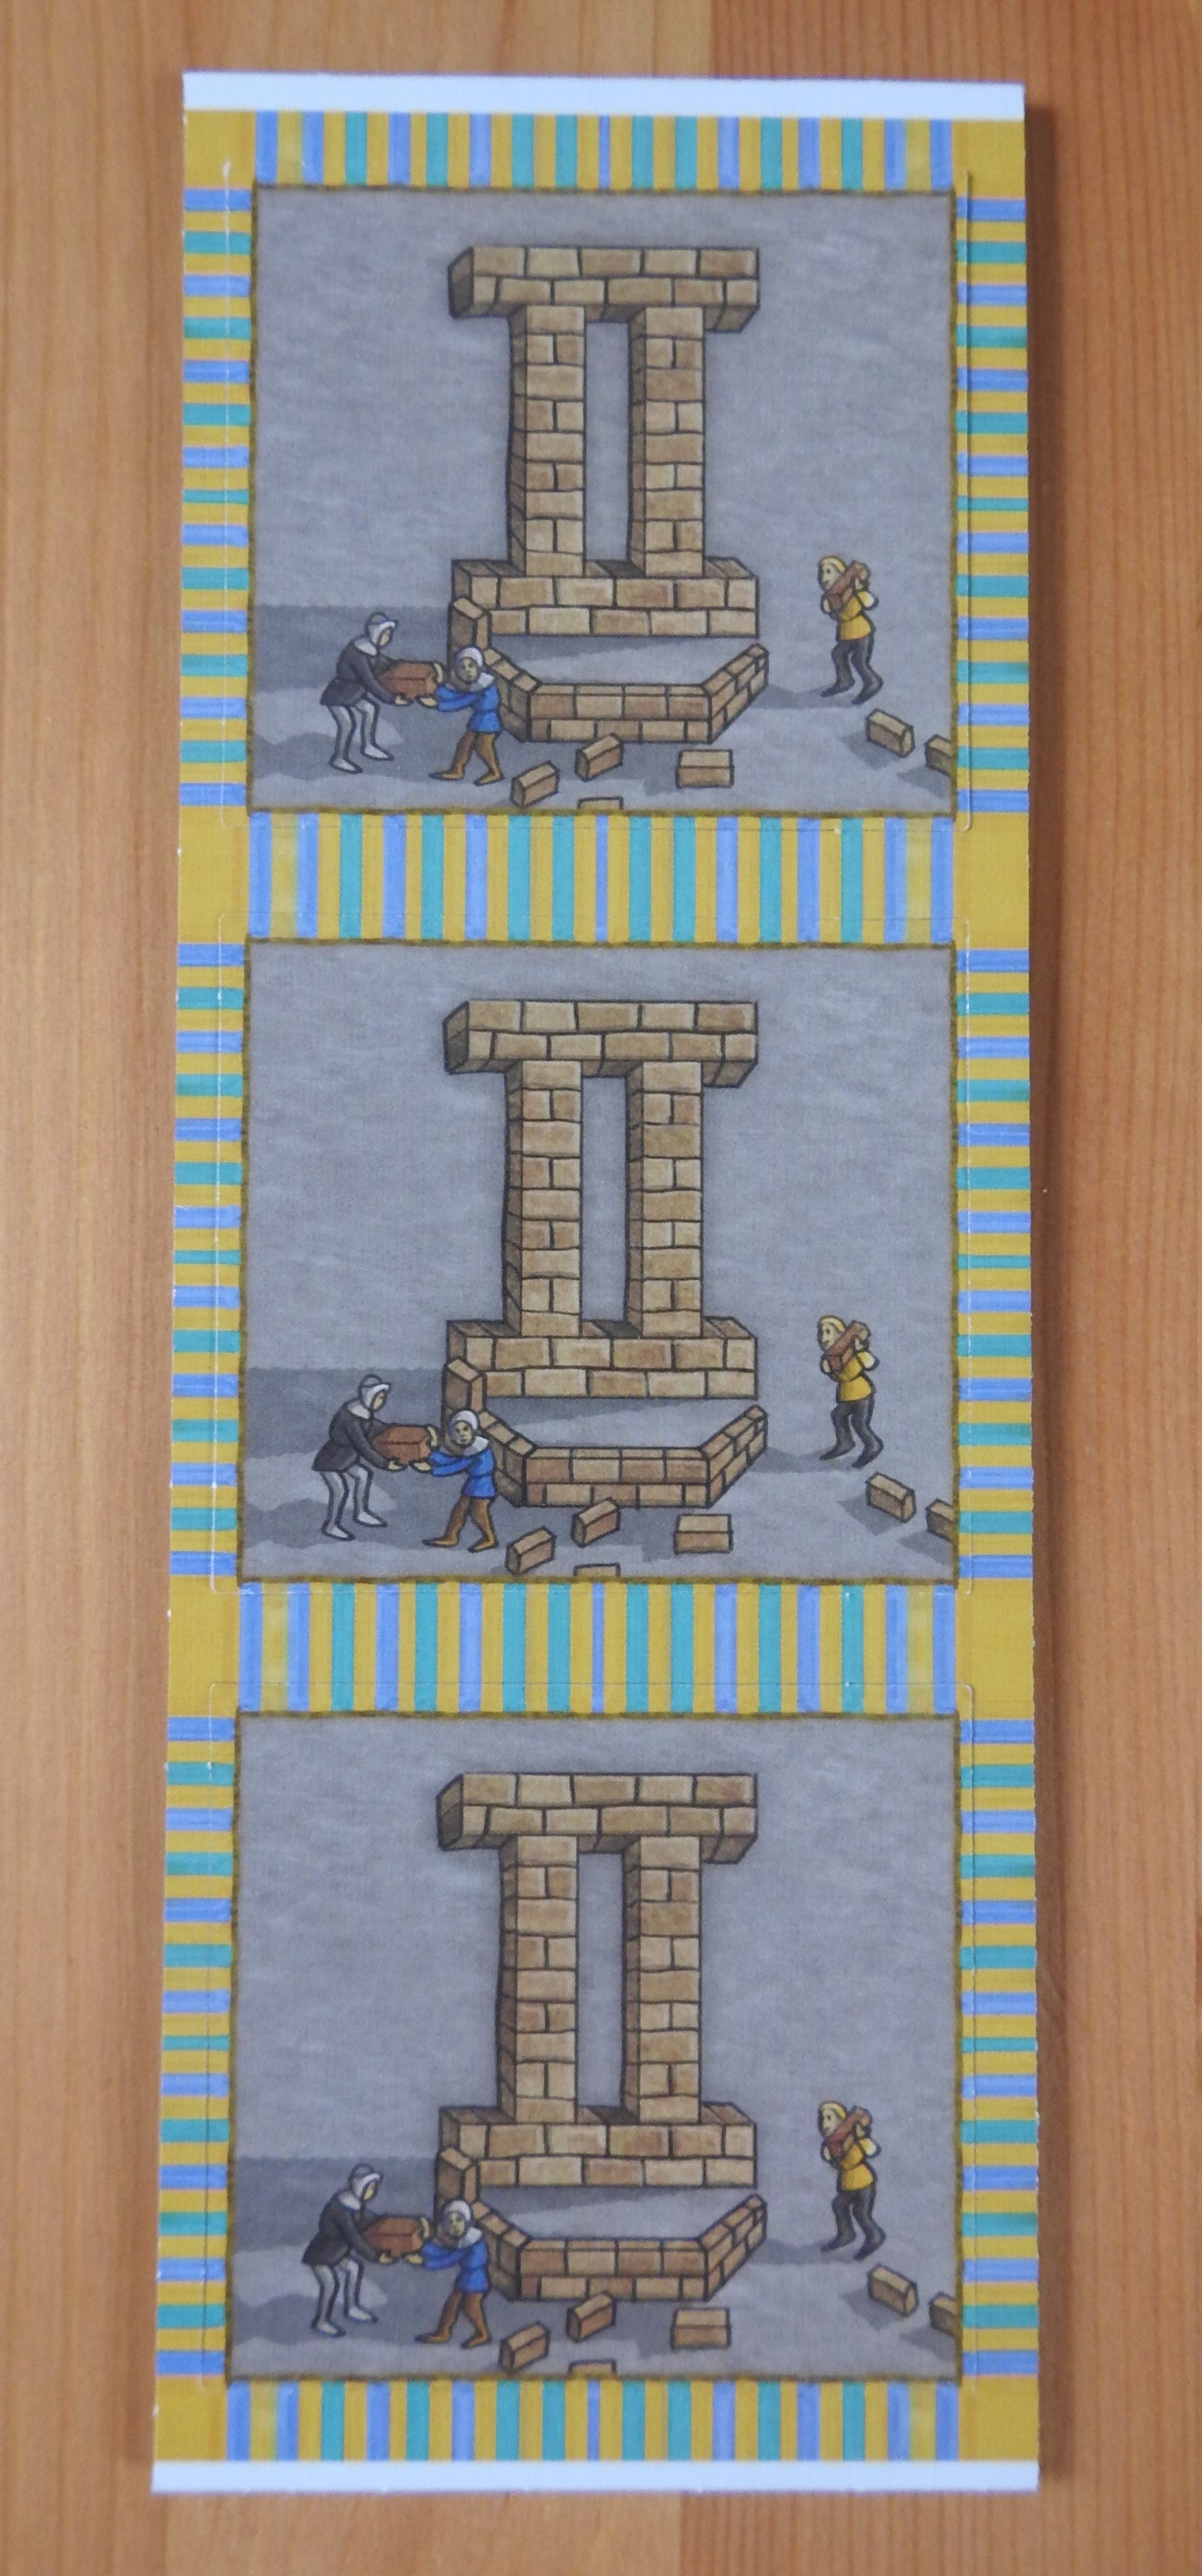 View of the back of the 3 place tiles.